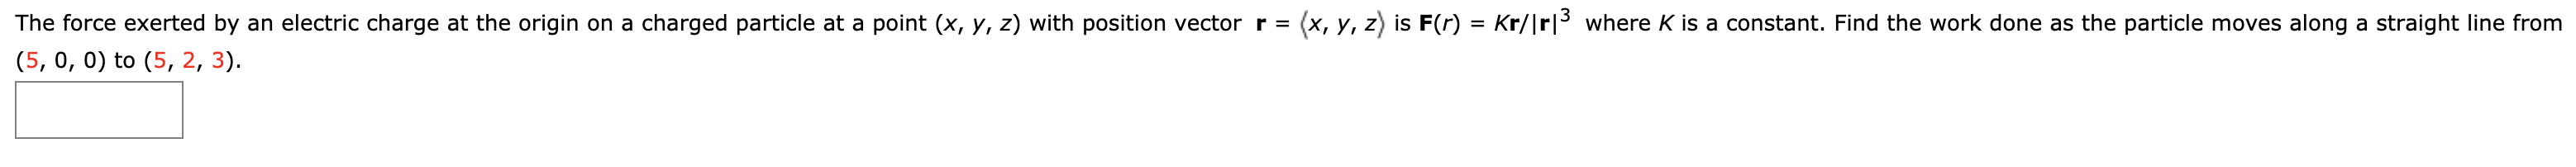 (x, y, z is F(r) = Kr/|rl3where K is a constant. Find the work done as the particle moves along a straight line from
The force exerted by an electric charge at the origin on a charged particle at a point (x, y, z) with position vector r =
(5, 0, 0) to (5, 2, 3)
